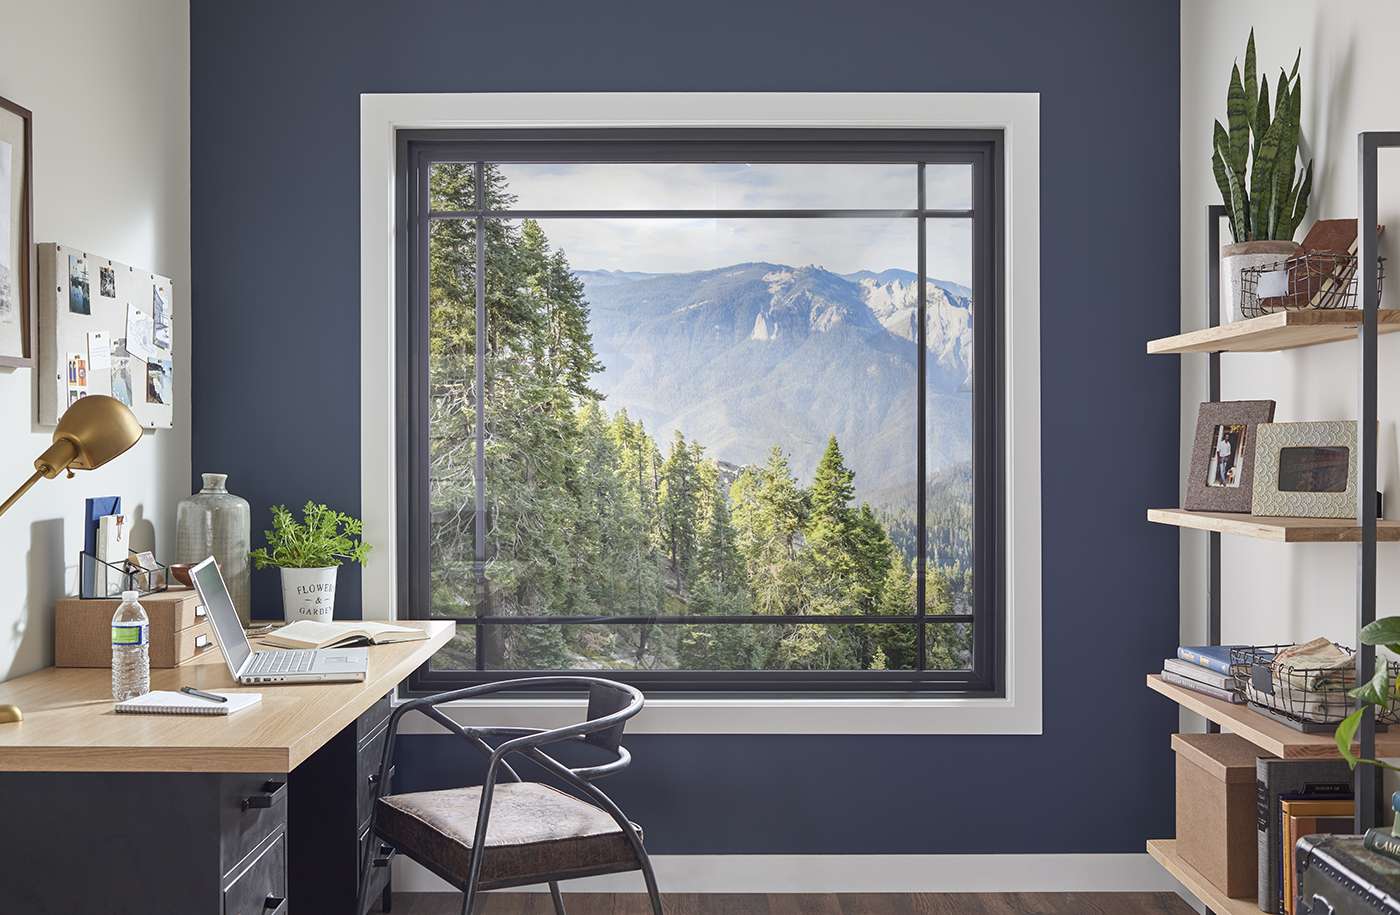 Picture style window in a home office.